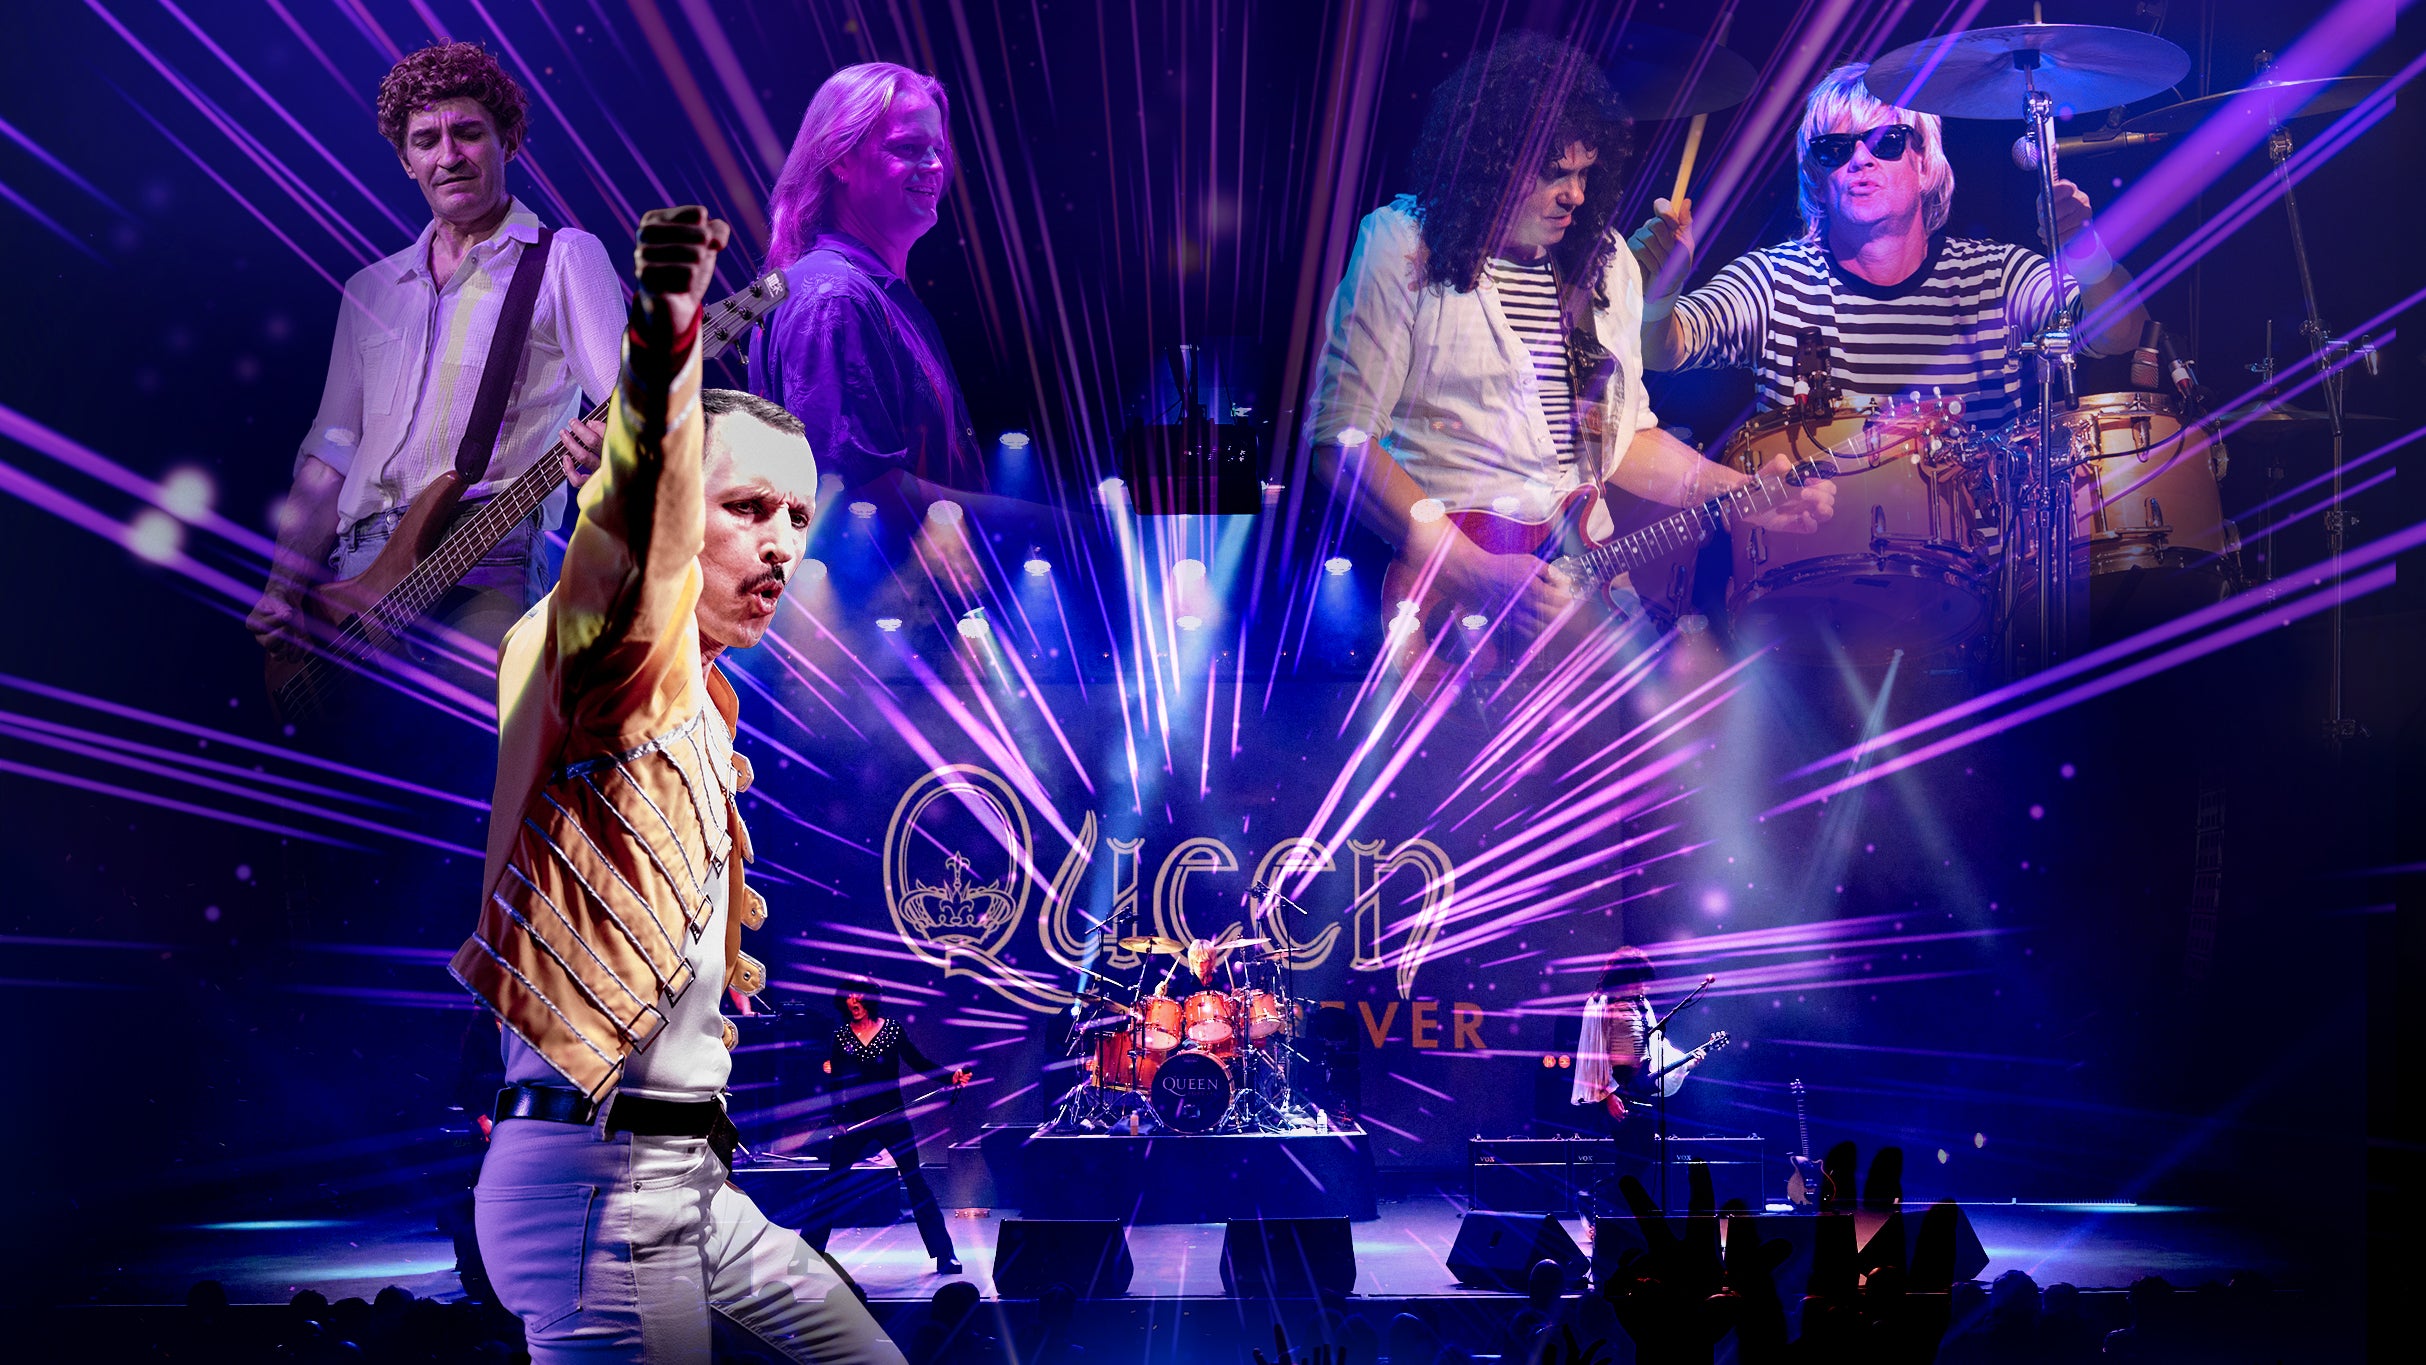 Image used with permission from Ticketmaster | Queen Forever - A Night at The Theatre tickets